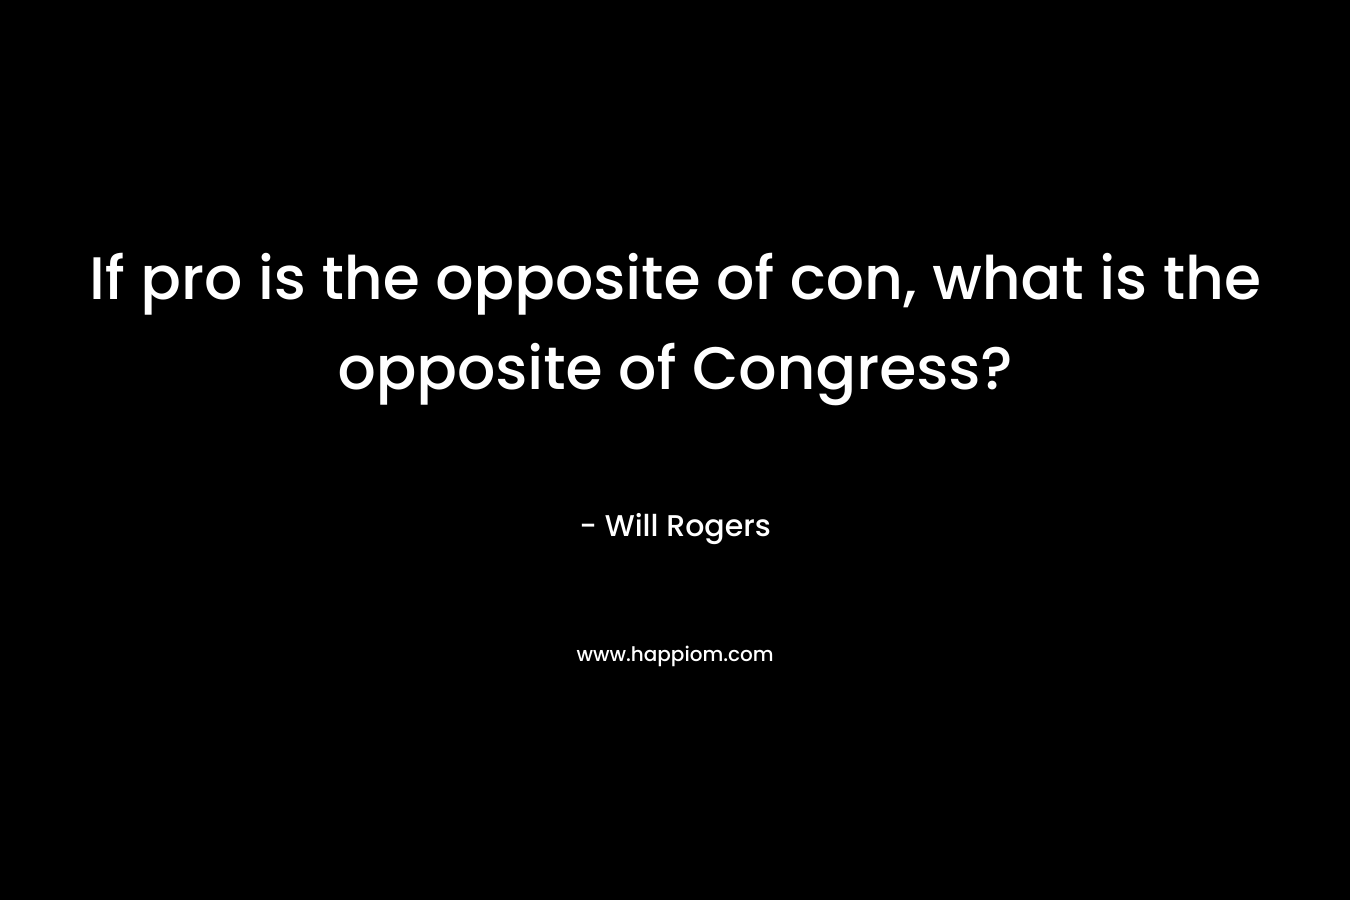 If pro is the opposite of con, what is the opposite of Congress?